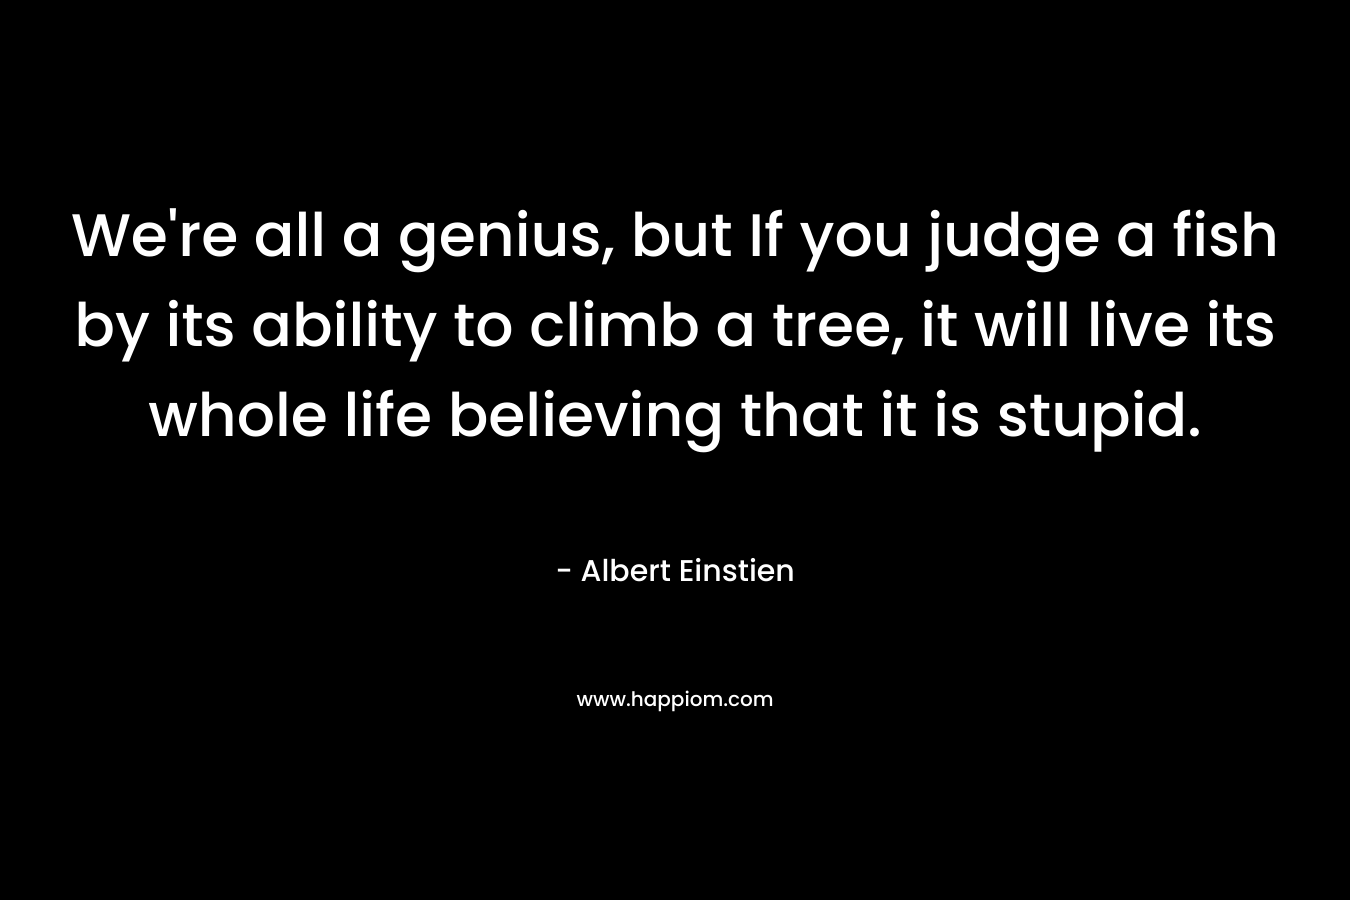 We're all a genius, but If you judge a fish by its ability to climb a tree, it will live its whole life believing that it is stupid.